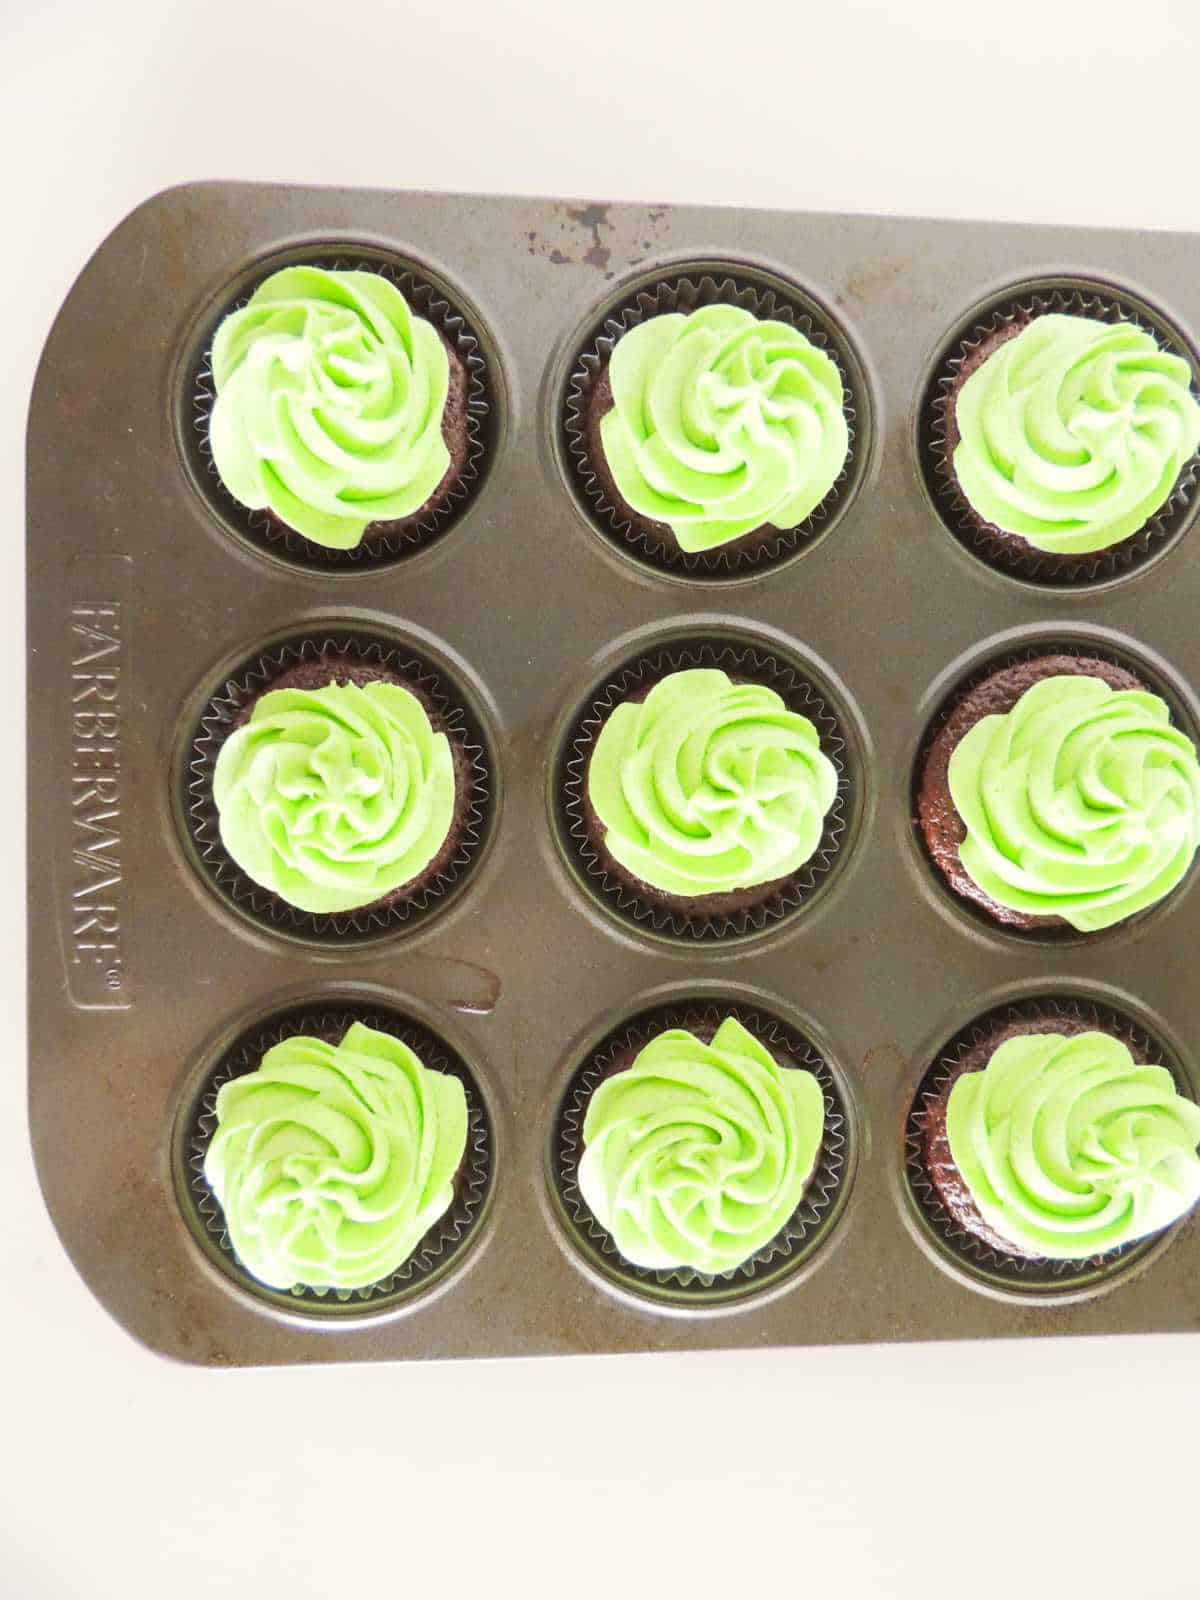 Piped green frosting on chocolate cupcakes.